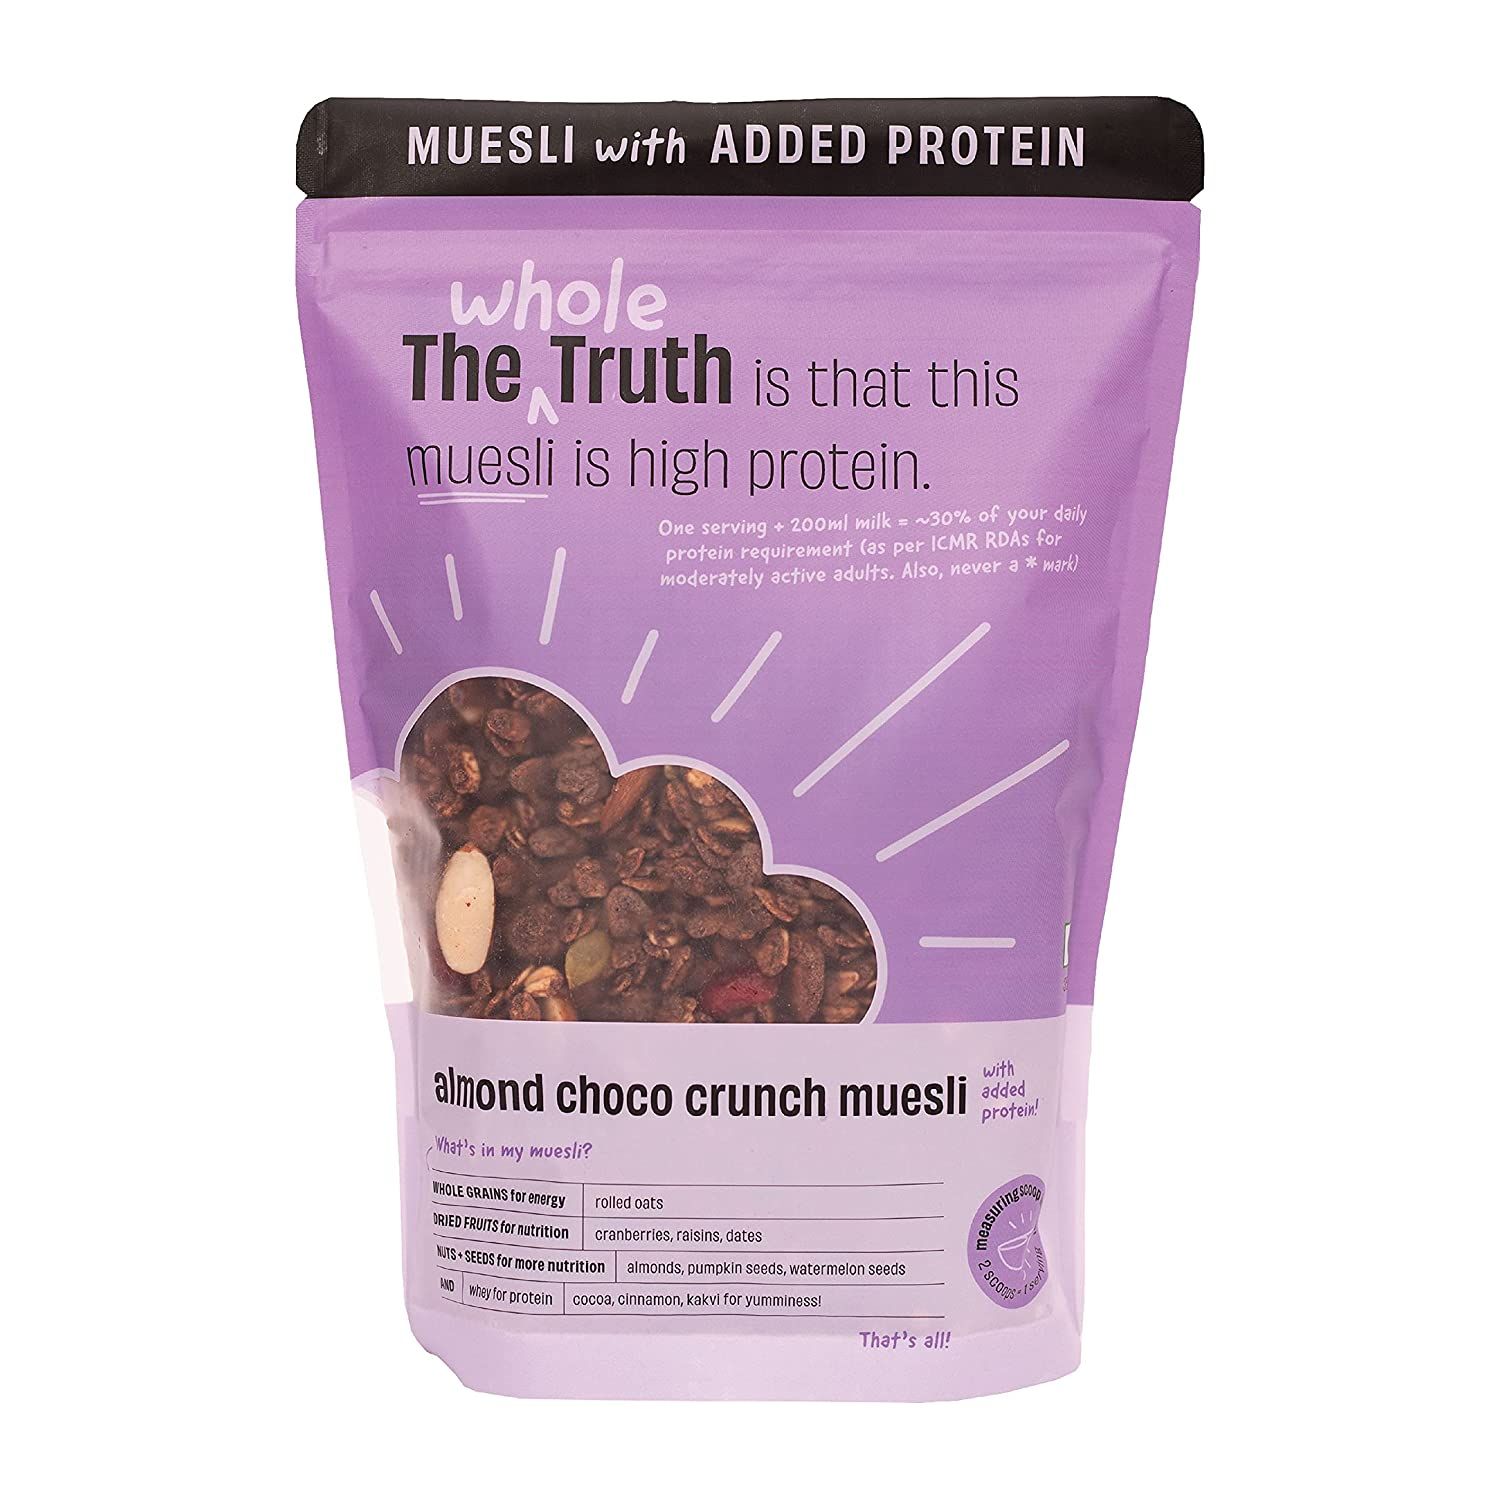 The Whole Truth High Protein Breakfast Muesli - Almond Choco Crunch Image